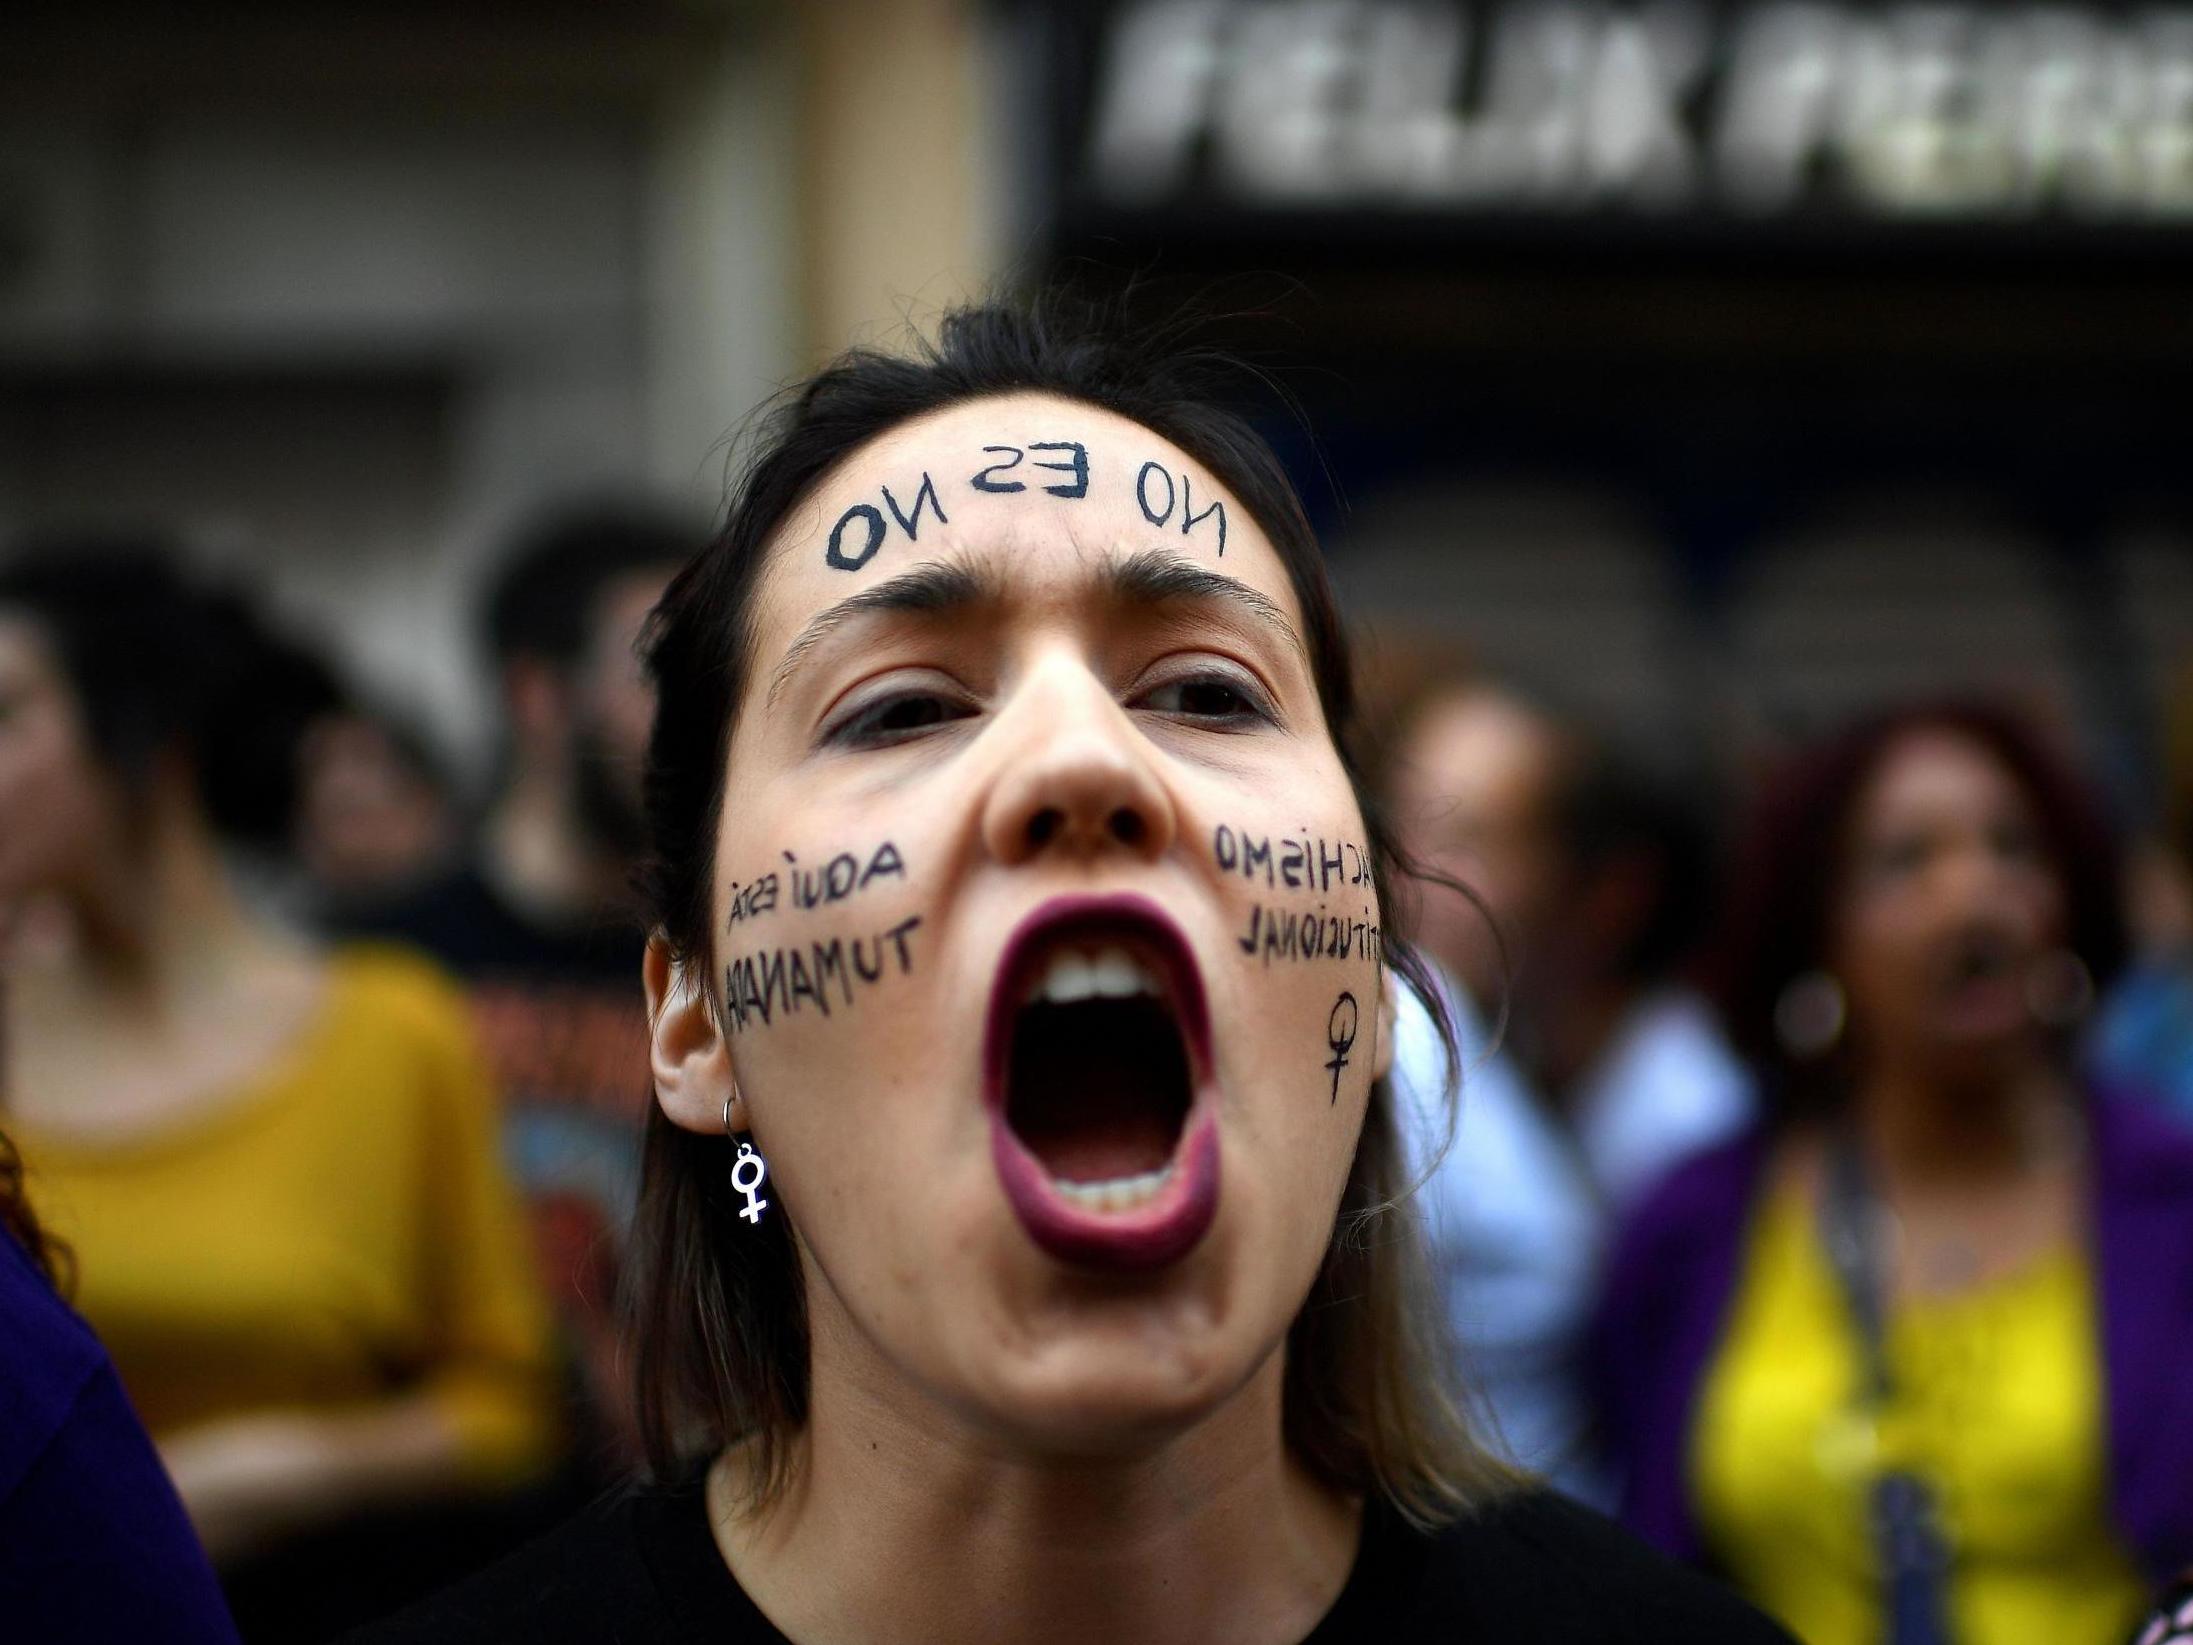 A woman shouts slogans during a demonstration in Madrid on April 26 2018, to protest after five men accused of gang raping a woman at Pamplona's bull-running festival were sentenced for "sexual abuse"